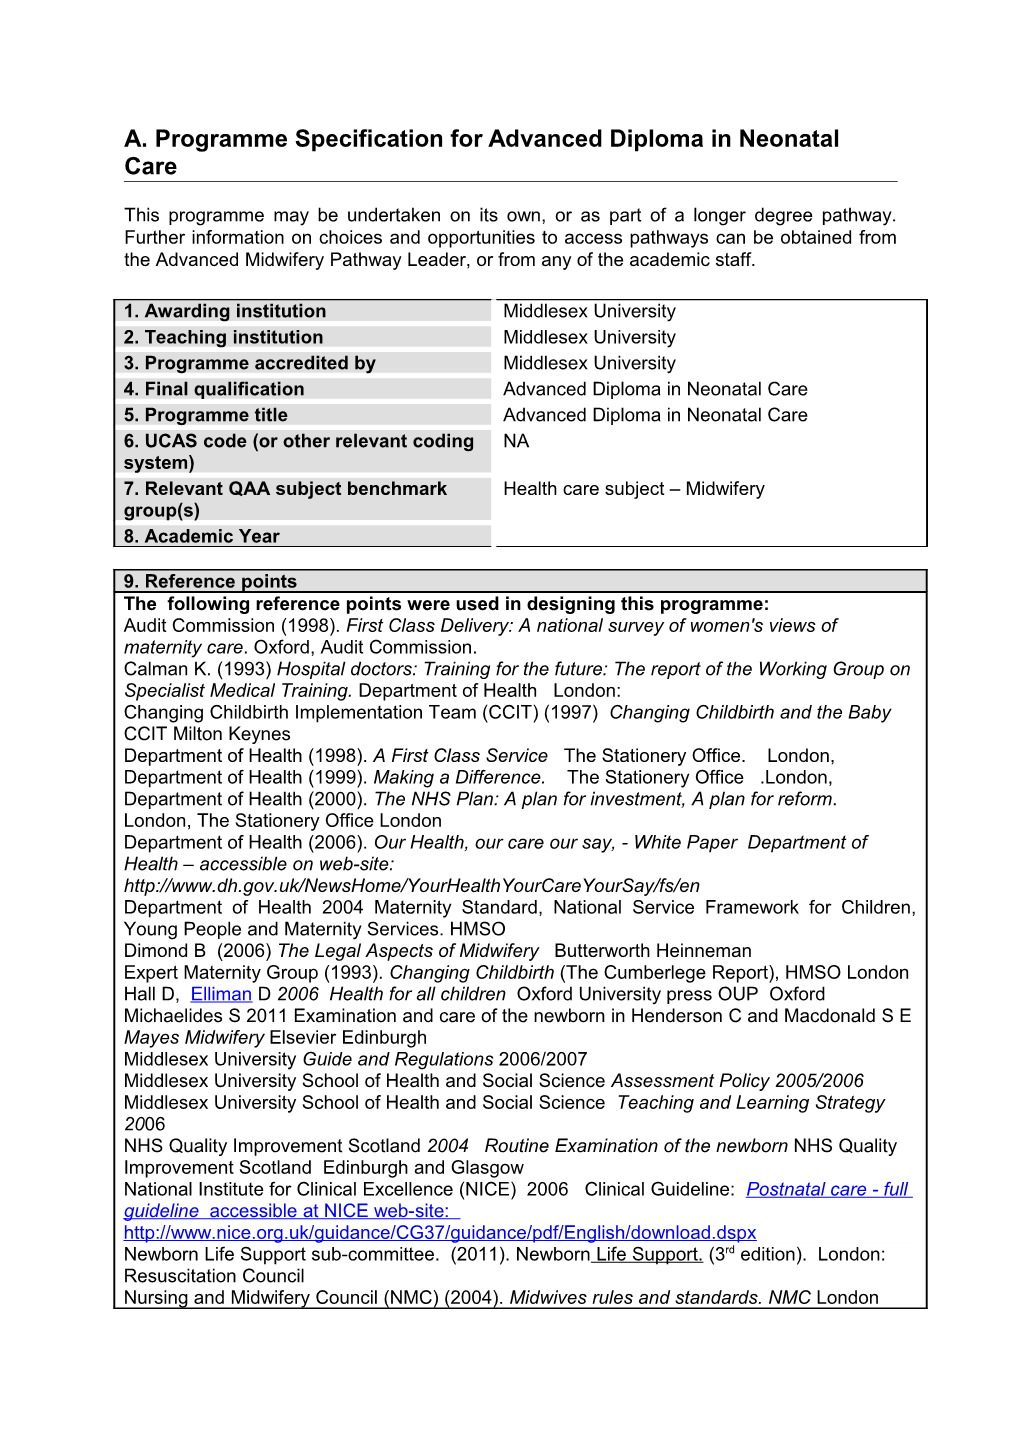 A. Programme Specification for Advanced Diploma in Neonatal Care